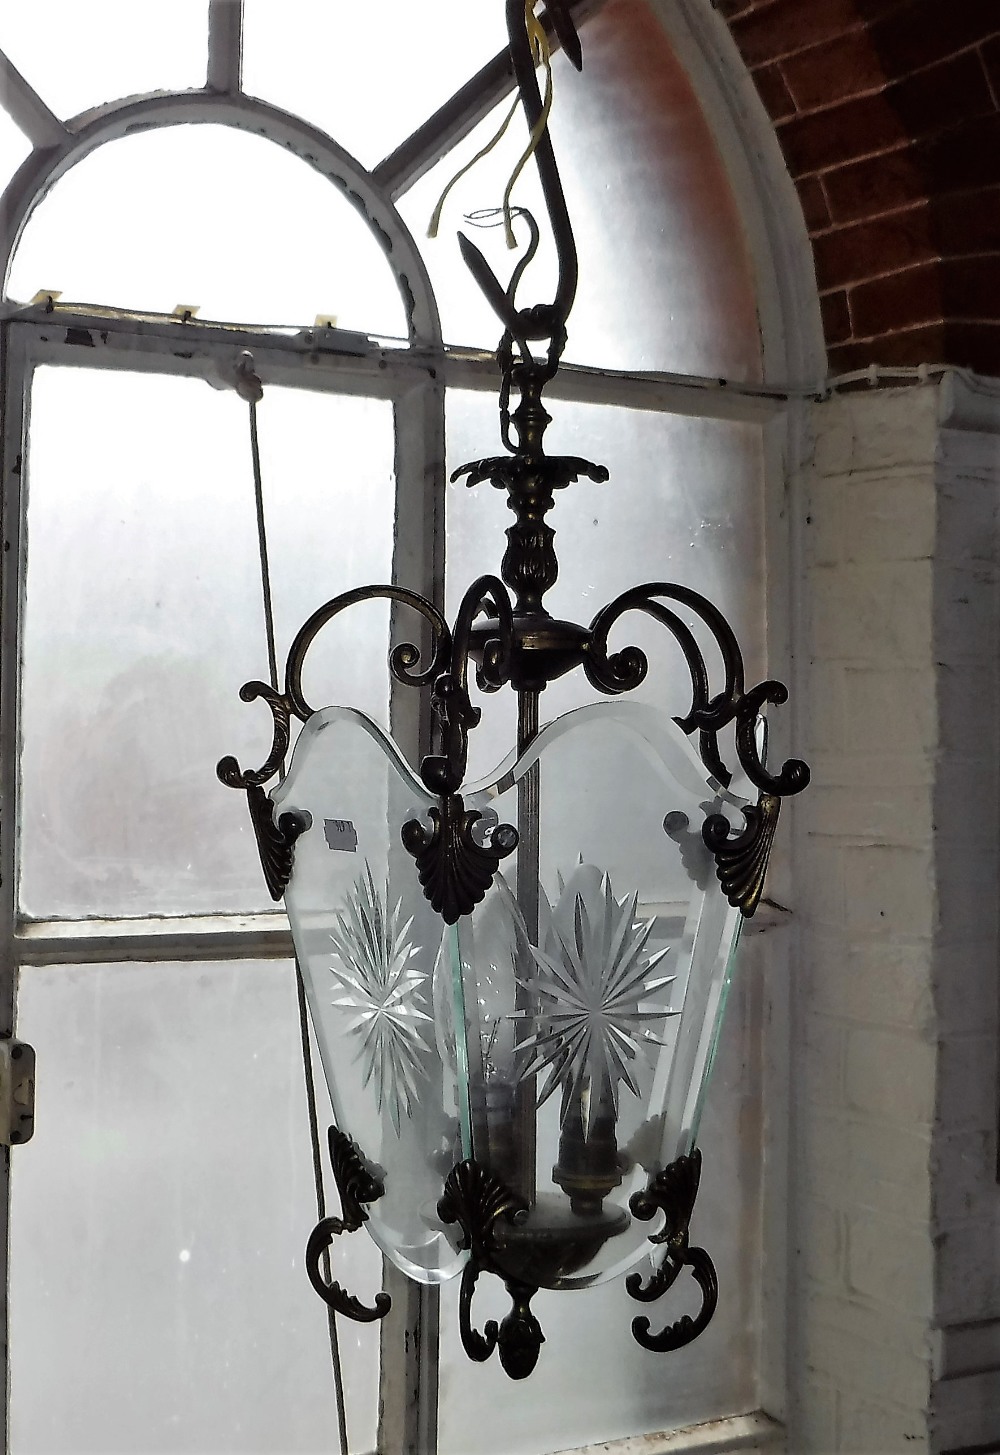 A PAIR OF HALL LANTERNS with cut glass panels - Image 2 of 2